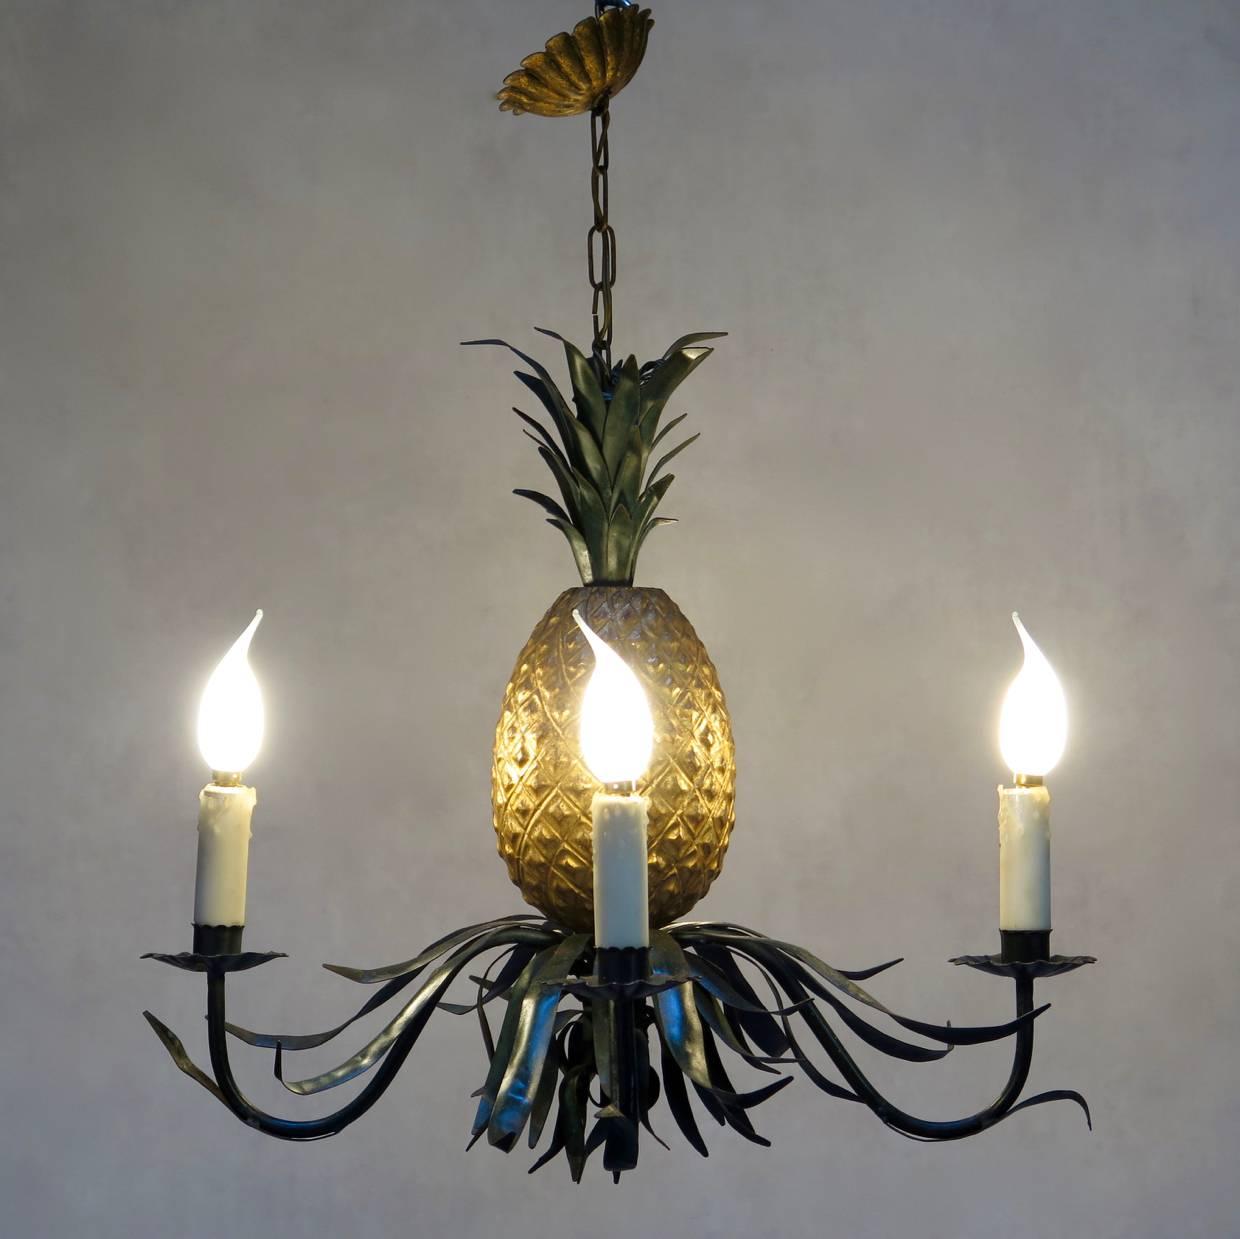 Fun and rather lovely painted iron and tôle four-light chandelier from the 1940s-1950s. The body is painted gold and the leaves and arms shiny dark green. Complete with original chain and rosette.